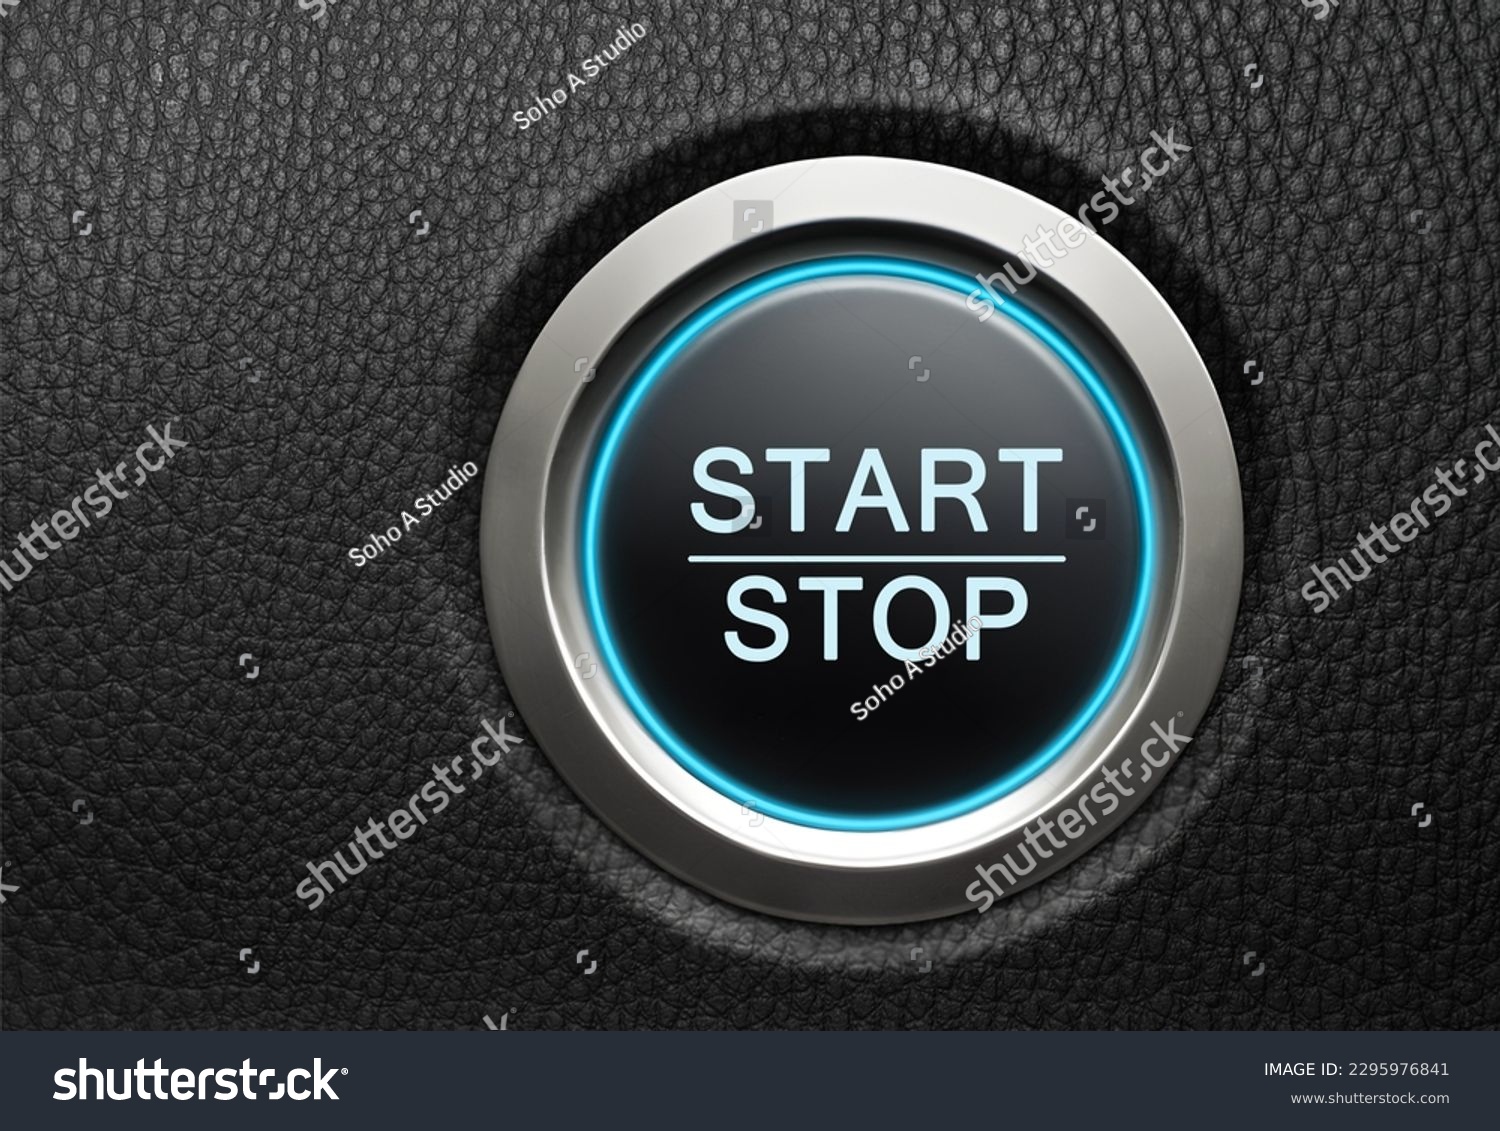 Engine Start Stop button on modern car. Black leather dashboard copy space #2295976841